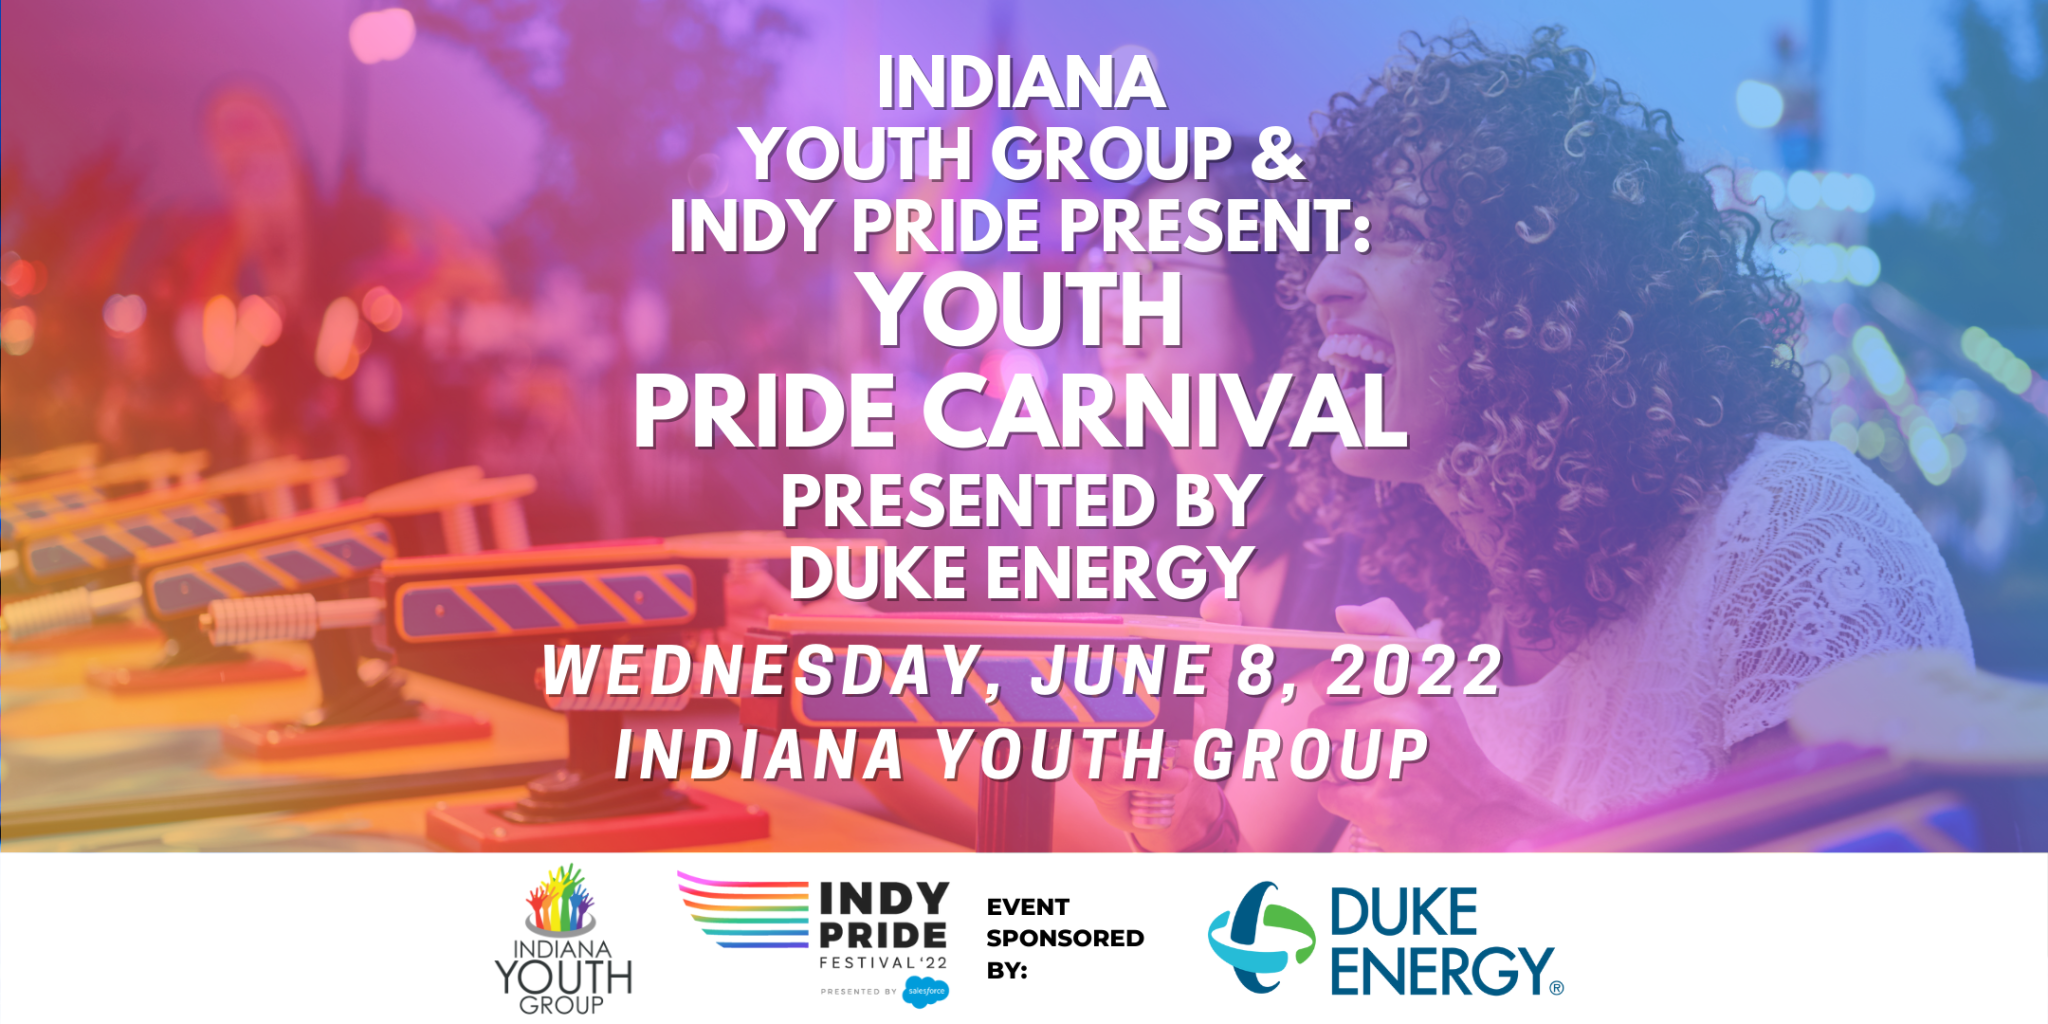 Indiana Youth Group and Indy Pride present Youth Pride Carnival